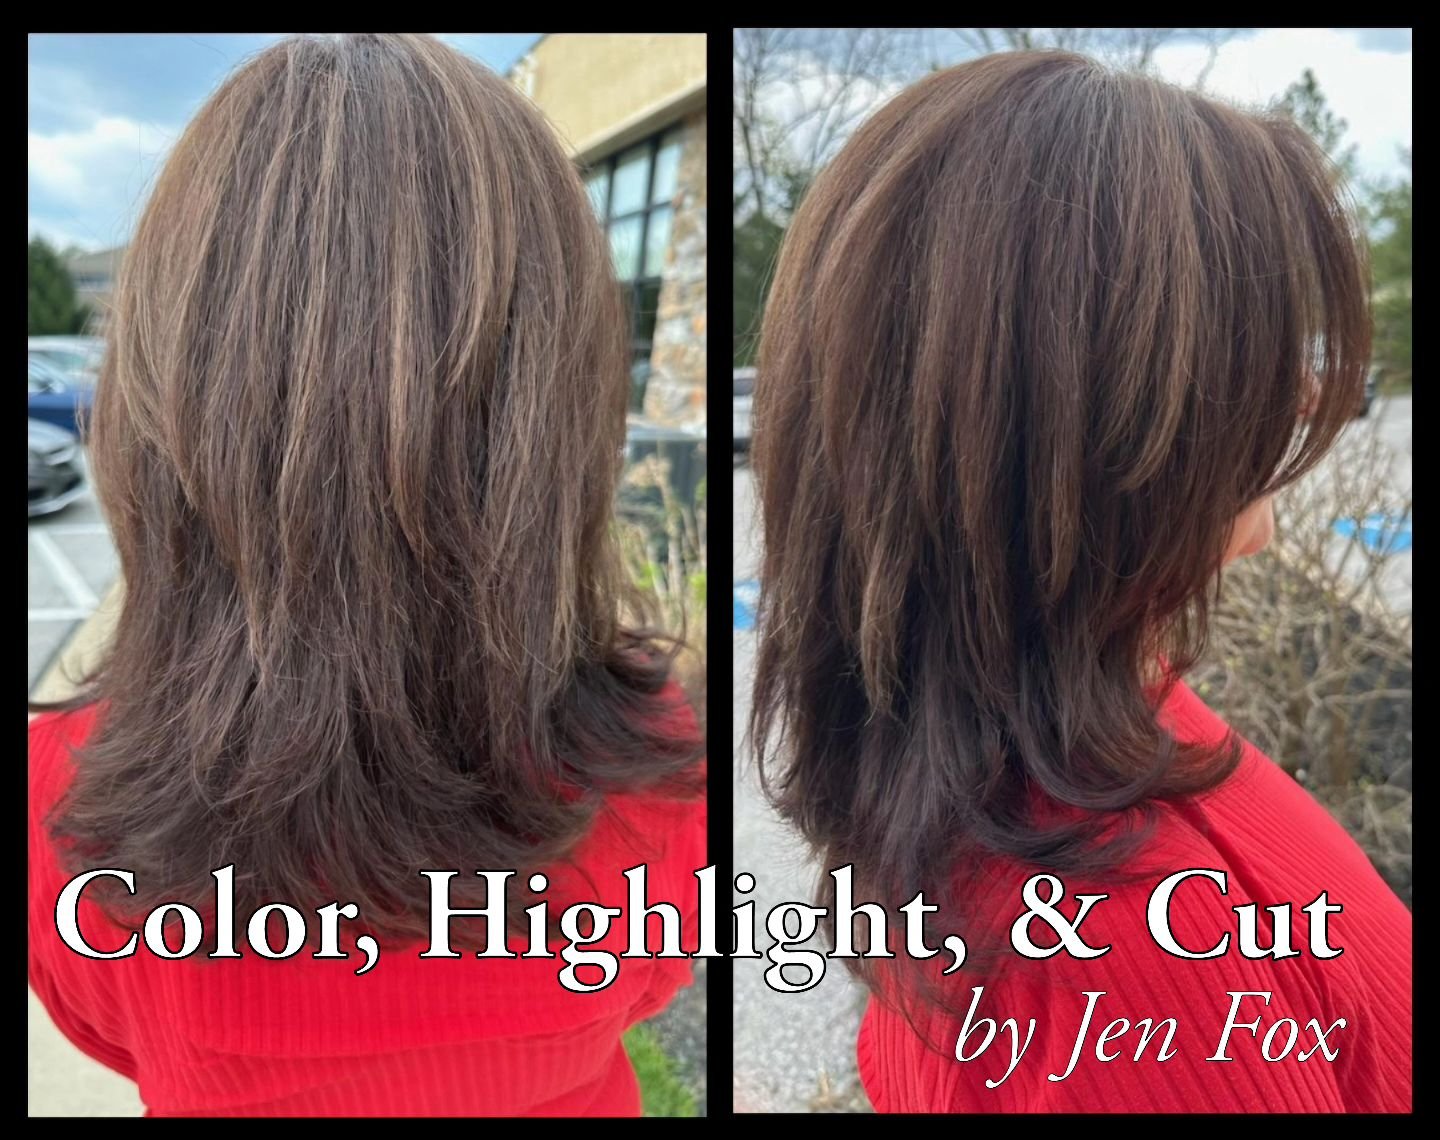 Our New Talented Designer, Jen, helped this client update her style with a full color, some caramel highlights, and a fresh layered cut. Let Jen help you update your style, too. Make an appointment today at
https://balancehairspa.com/appointment-requ